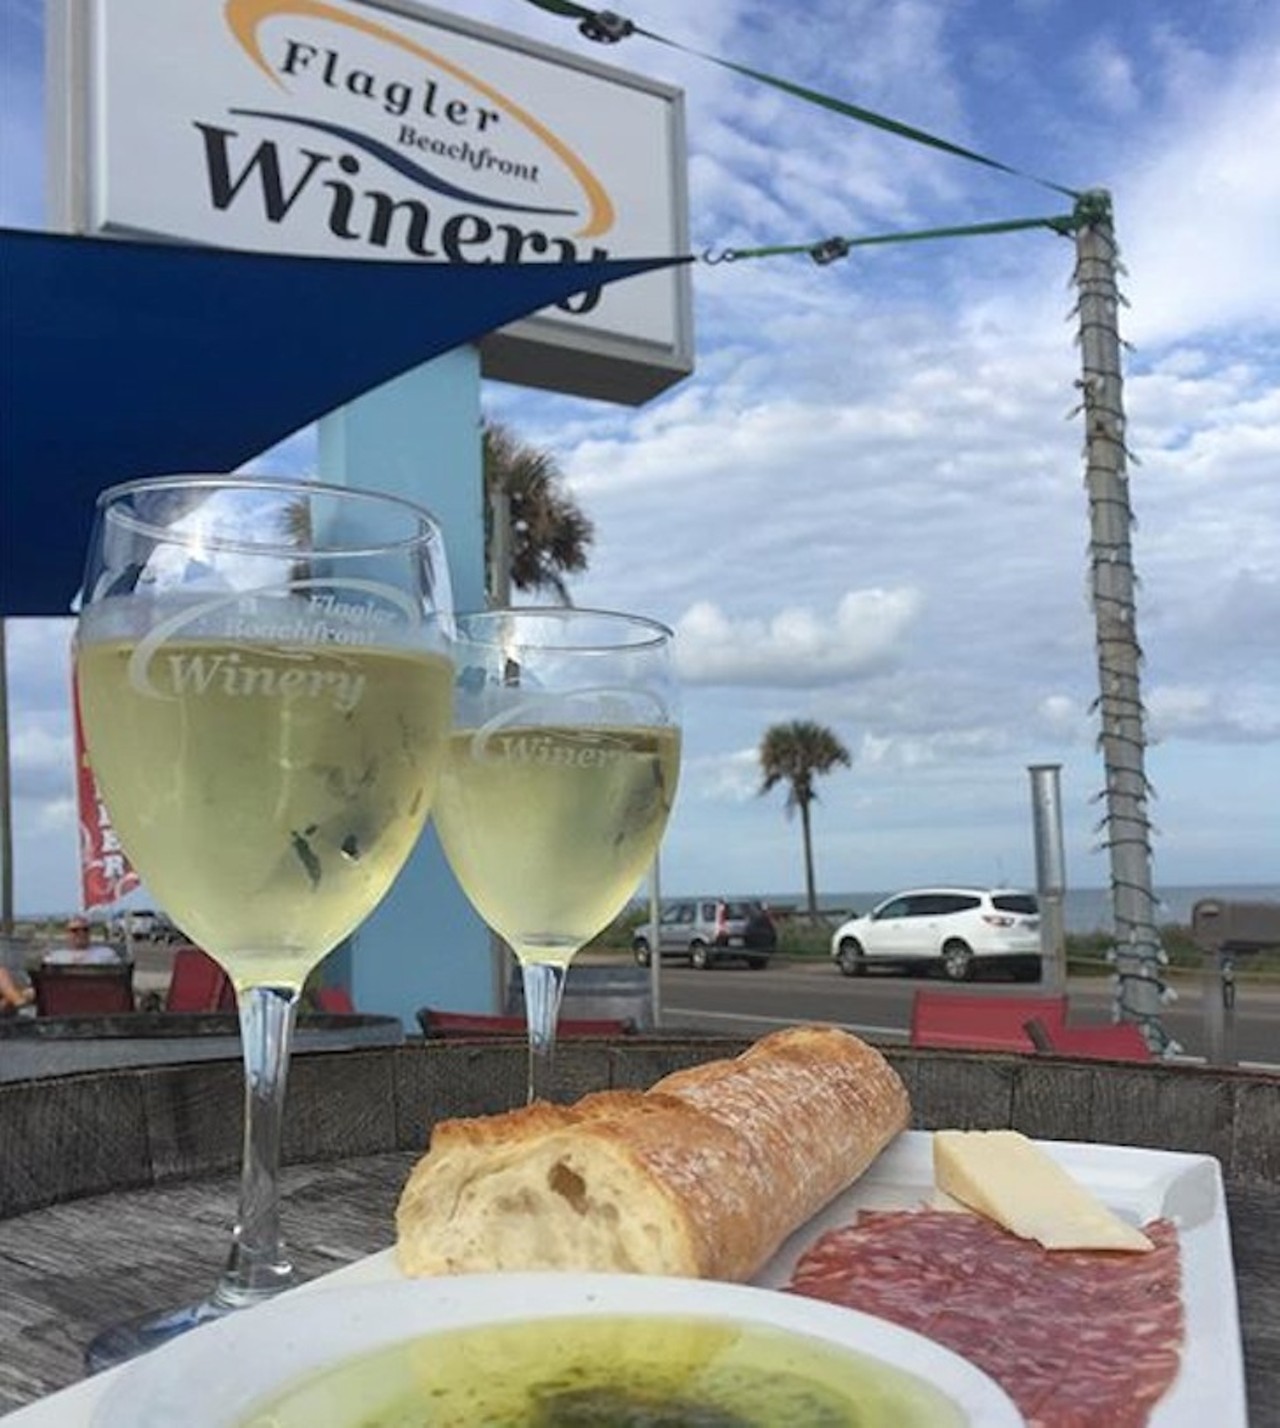 Flagler Beachfront Winery
611 N. Ocean Shore Blvd., Flagler Beach | 386-693-4950
Sampling wines on the beach gets a little sweeter with this winery&#146;s addition of tasty tapas boards, flatbreads and gourmet desserts. 
Photo via flaglerbeachfrontwinery/Instagram